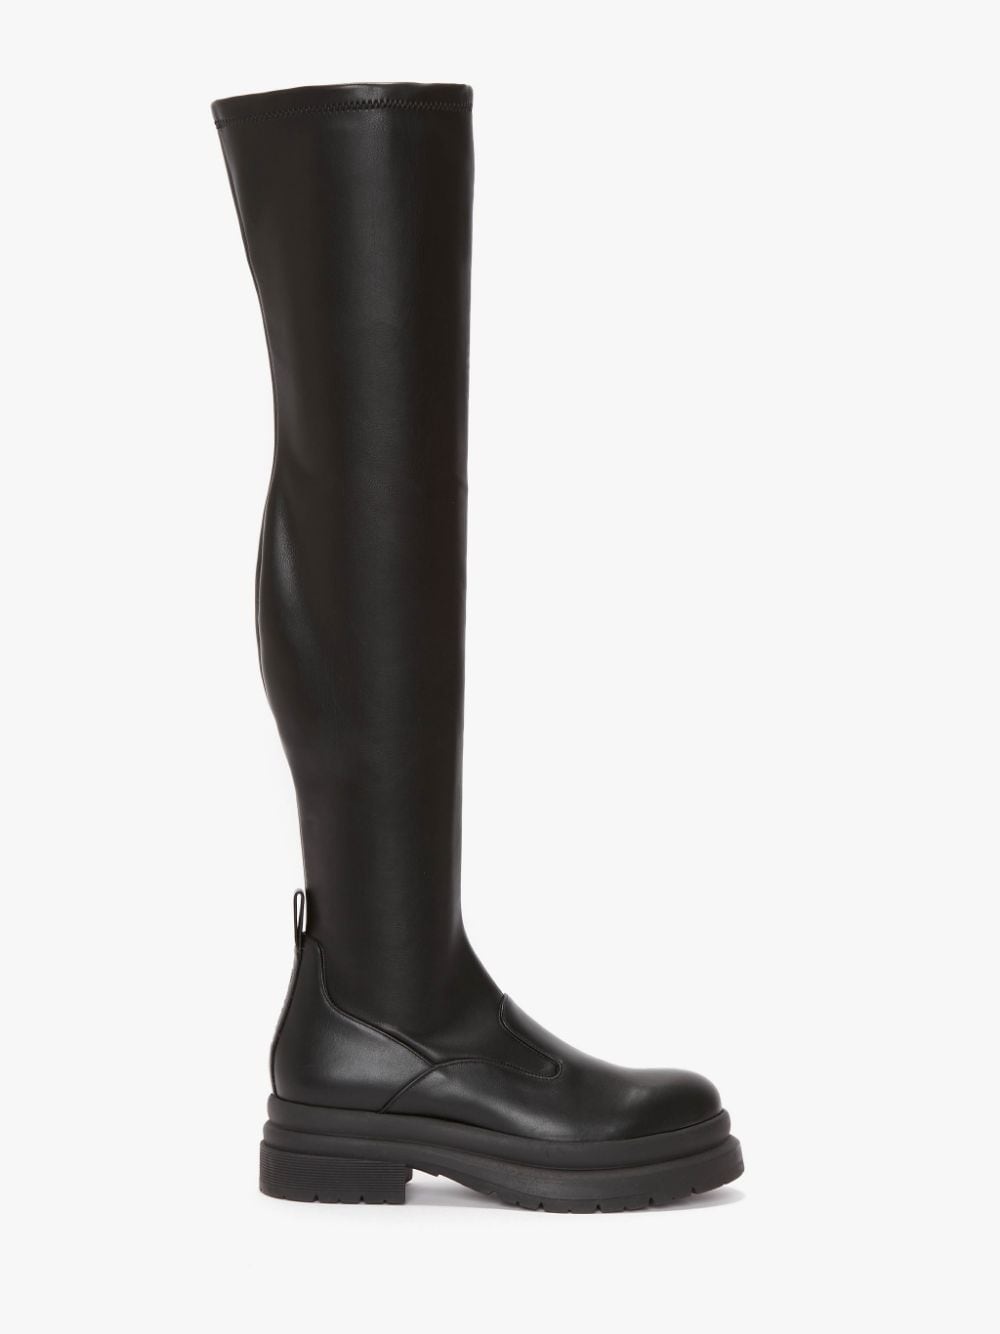 LEATHER OVER THE KNEE BOOT - 1